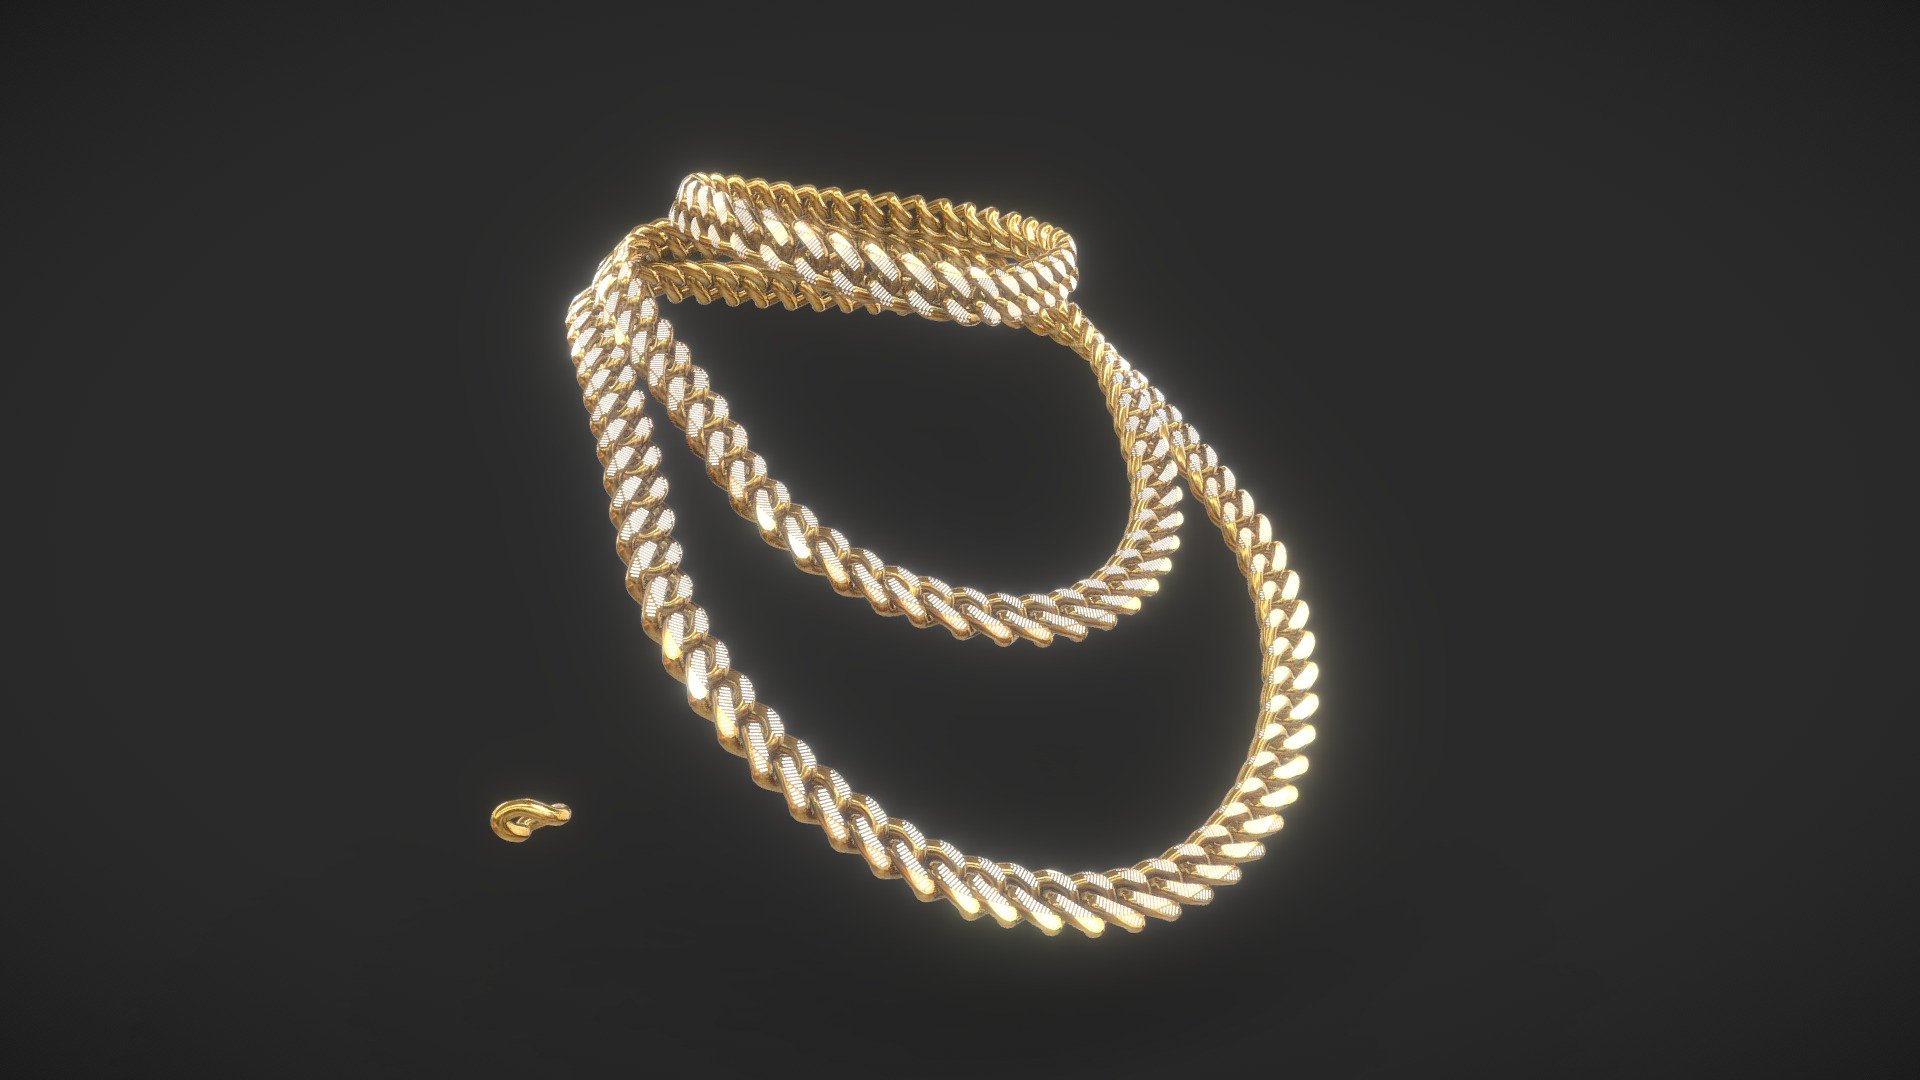 Cuban Link - 14mm Diamond Gold Necklace Set
Get your(meta)self some drip with this 14mm Iced out Gold Necklace set.
3 Chain lengths, and original link for customization 3d model